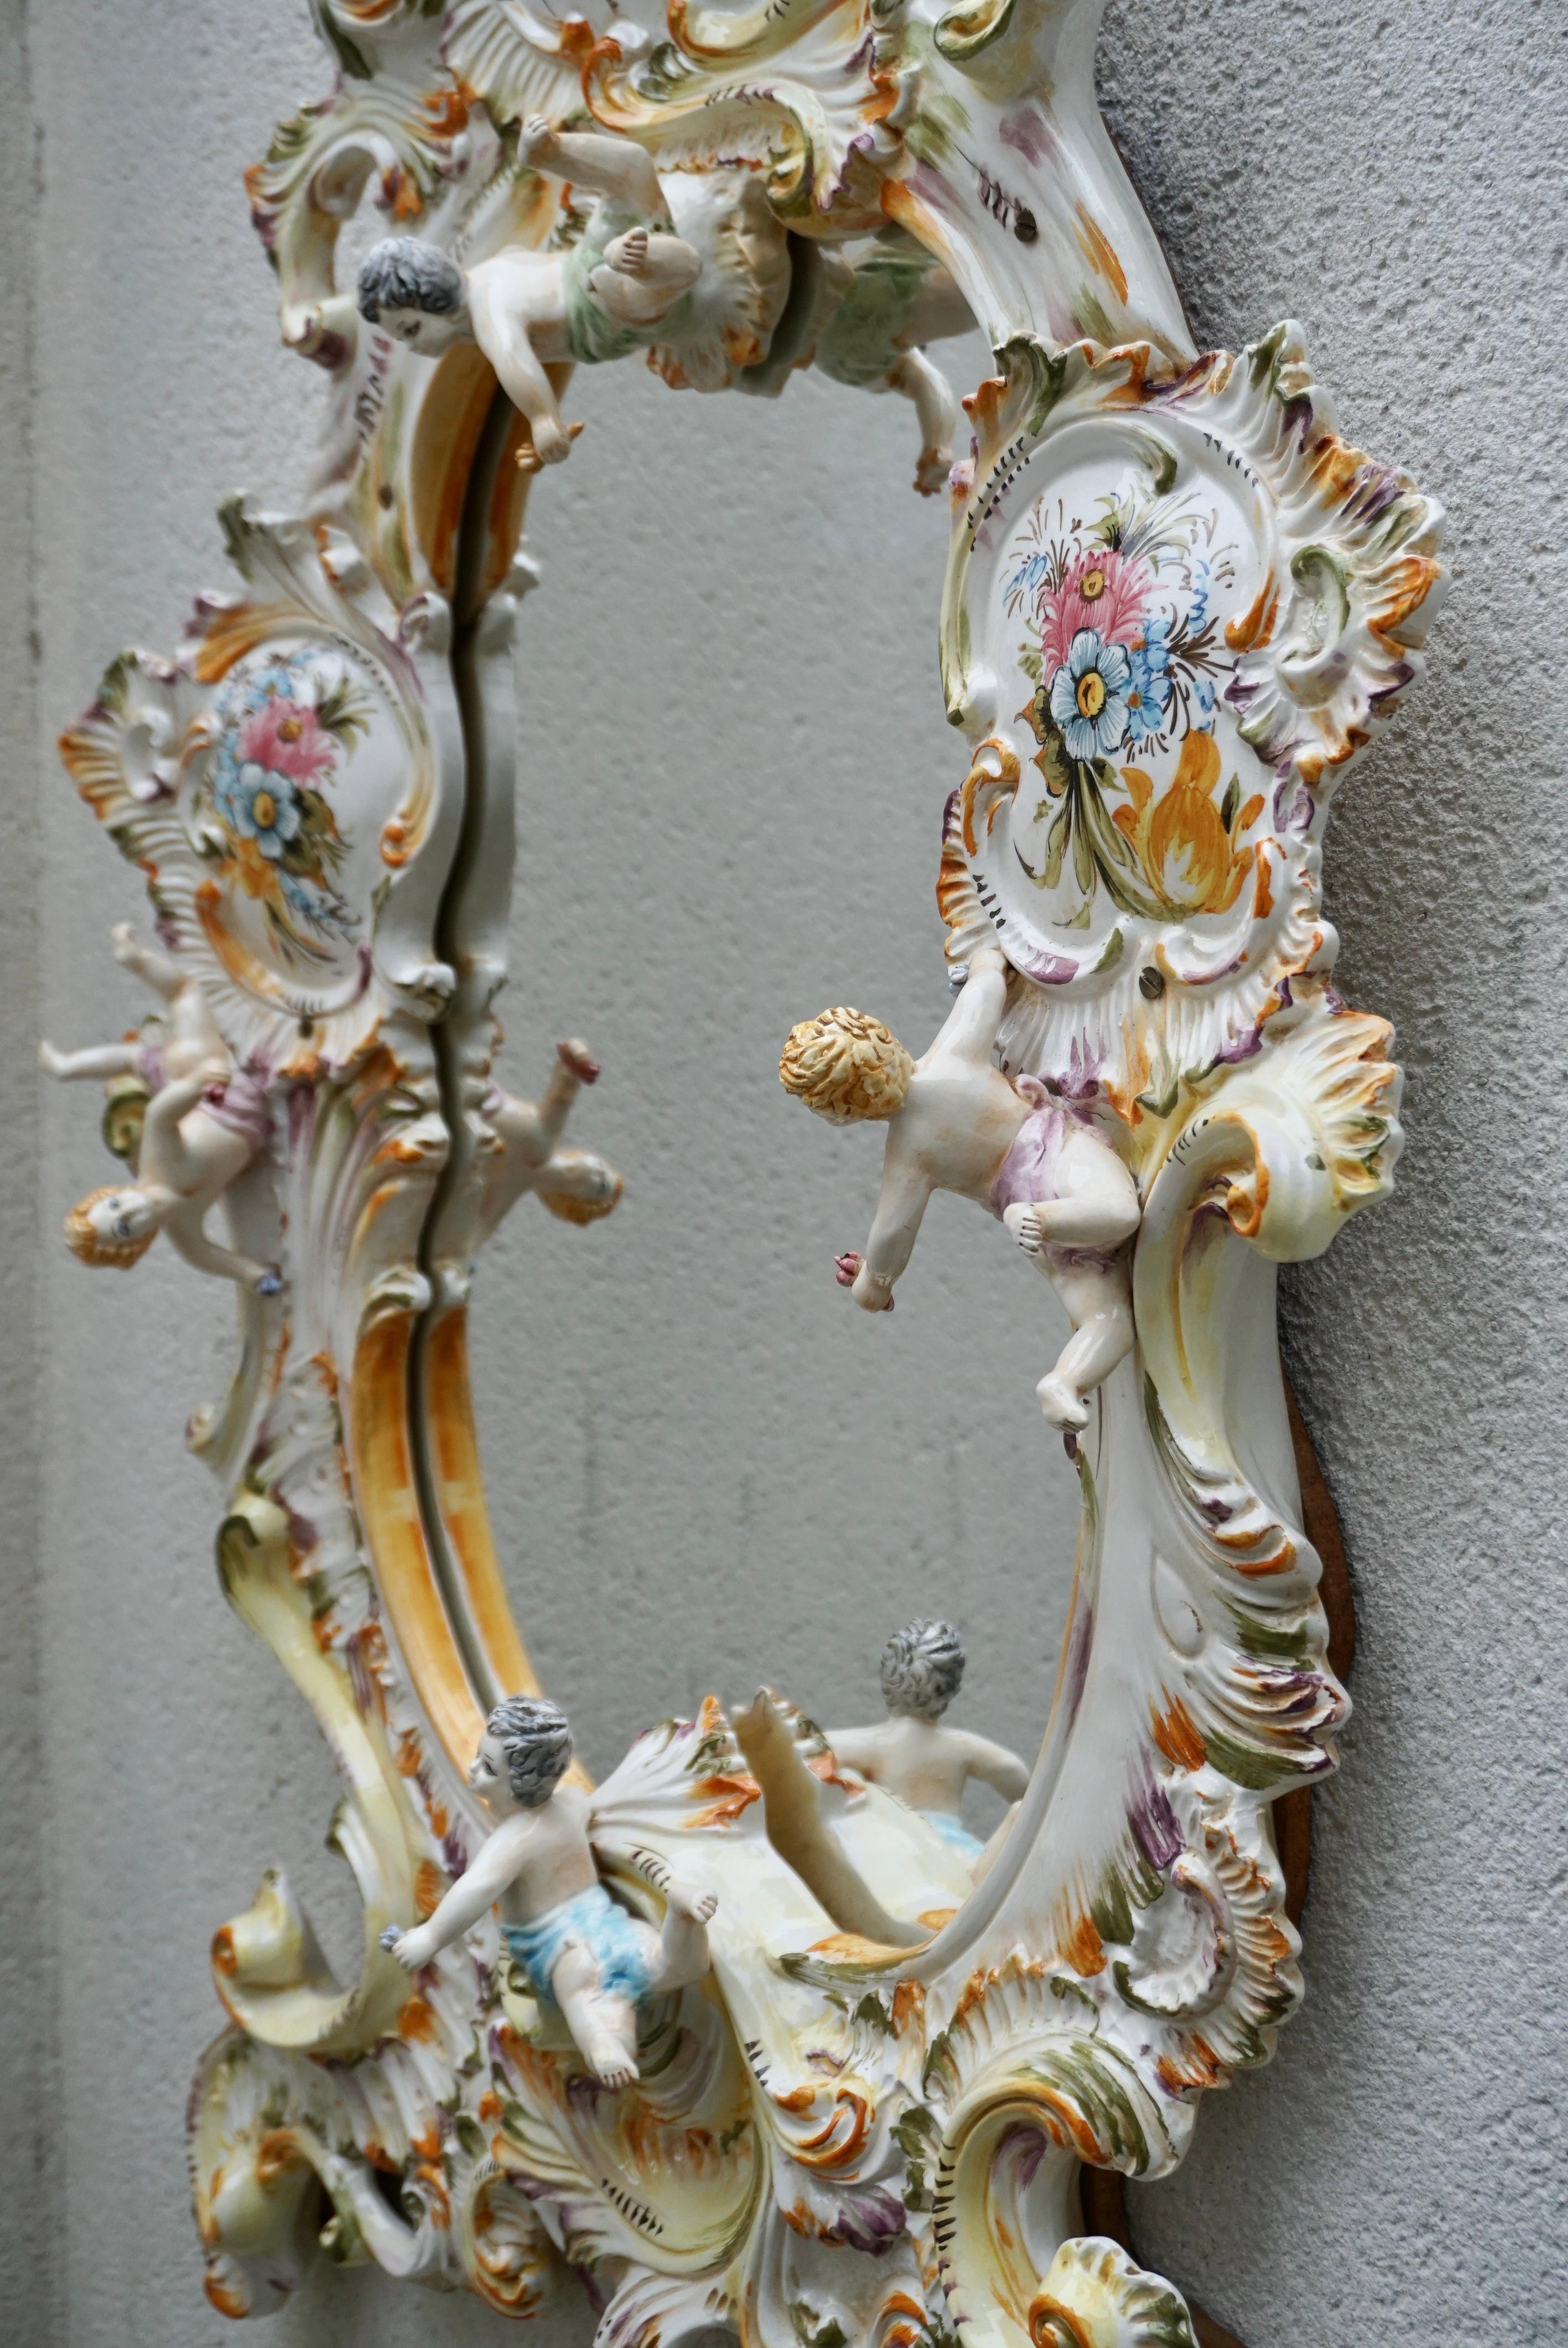 Mid-20th Century Italian Capodimonte Porcelain Mirror with Flowers and Cherubs For Sale 2